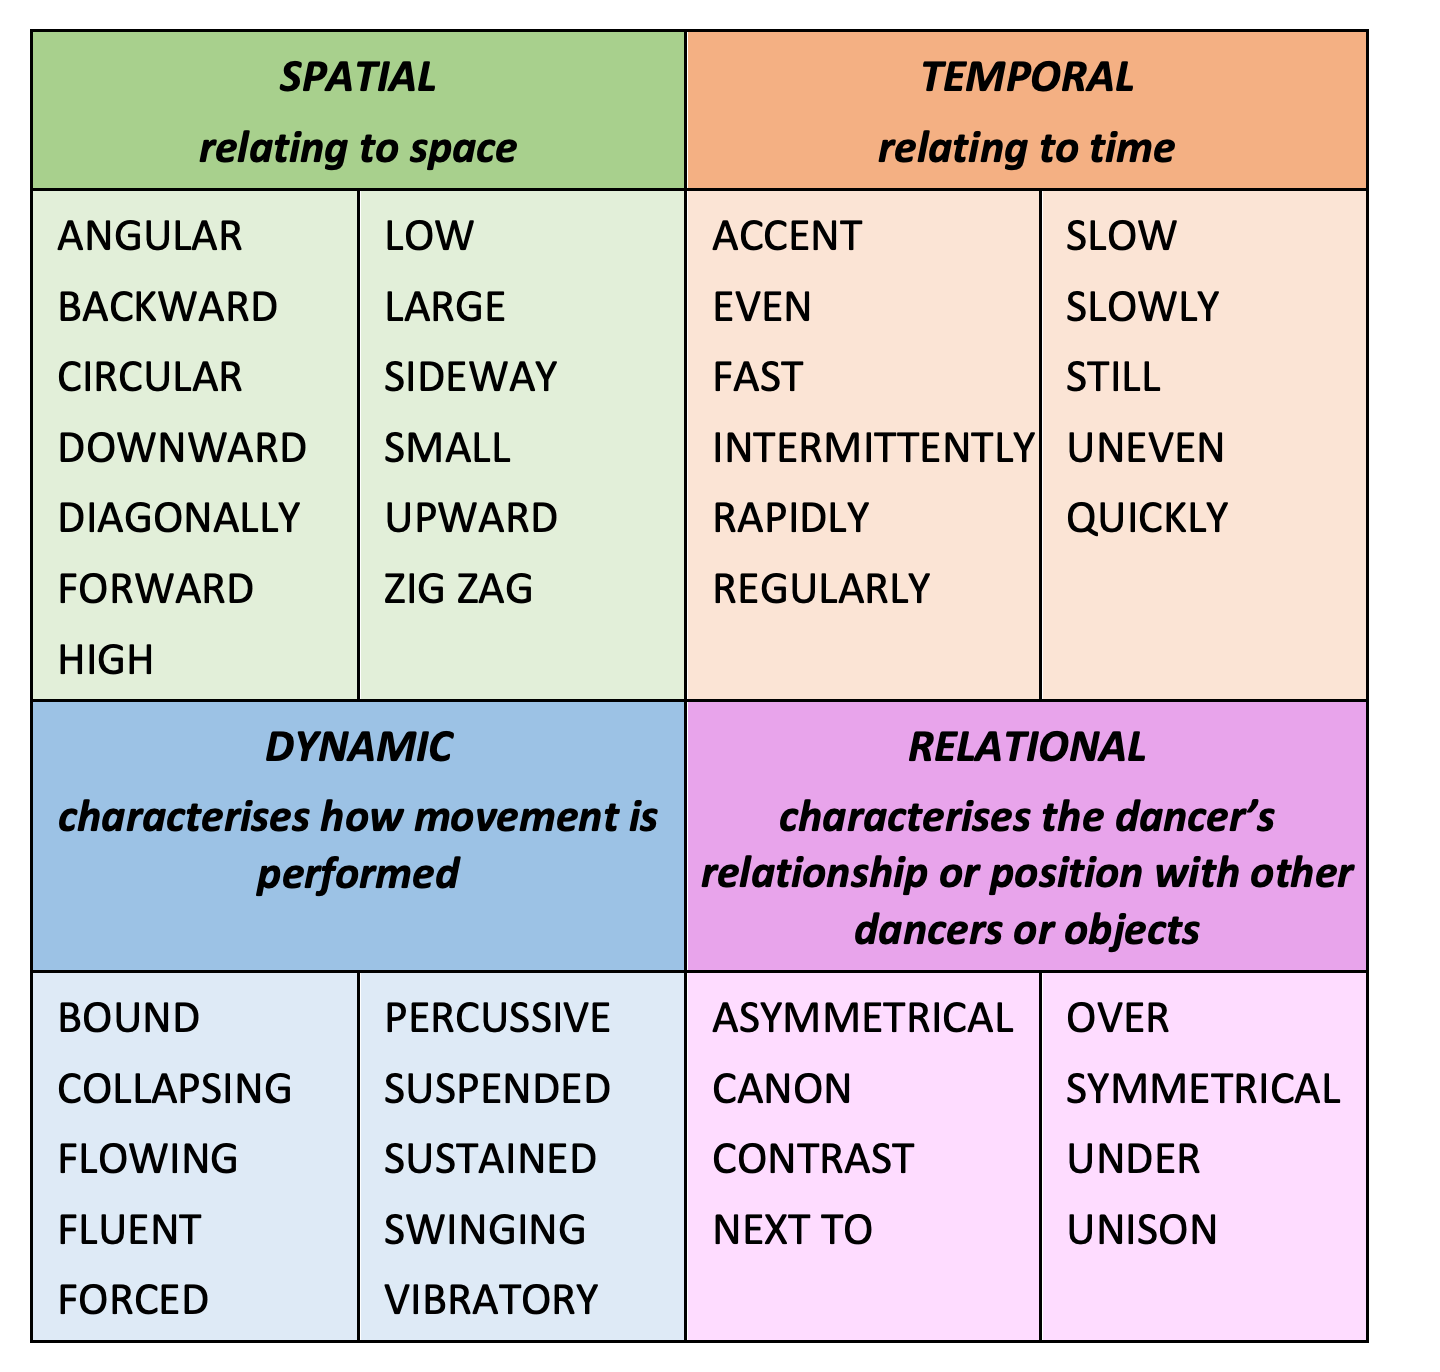 a completed table listing words used to describe spatial, temporal, dynamic and relational movements. The following words have been listed. For spatial: angular, backward, circular, downward, diagonally, forward, high, low, large, sideway, small, upward, zig zag. For temporal: accent, even, fast, intermittently, rapidly, regularly, slow, slowly, still, uneven, quickly. For dynamic: bound, collapsing, flowing, fluent, forced, percussive, suspended, sustained, swinging, vibratory. For relational: asymmetrical, canon, contrast, next to, over, symmetrical, under, unison.